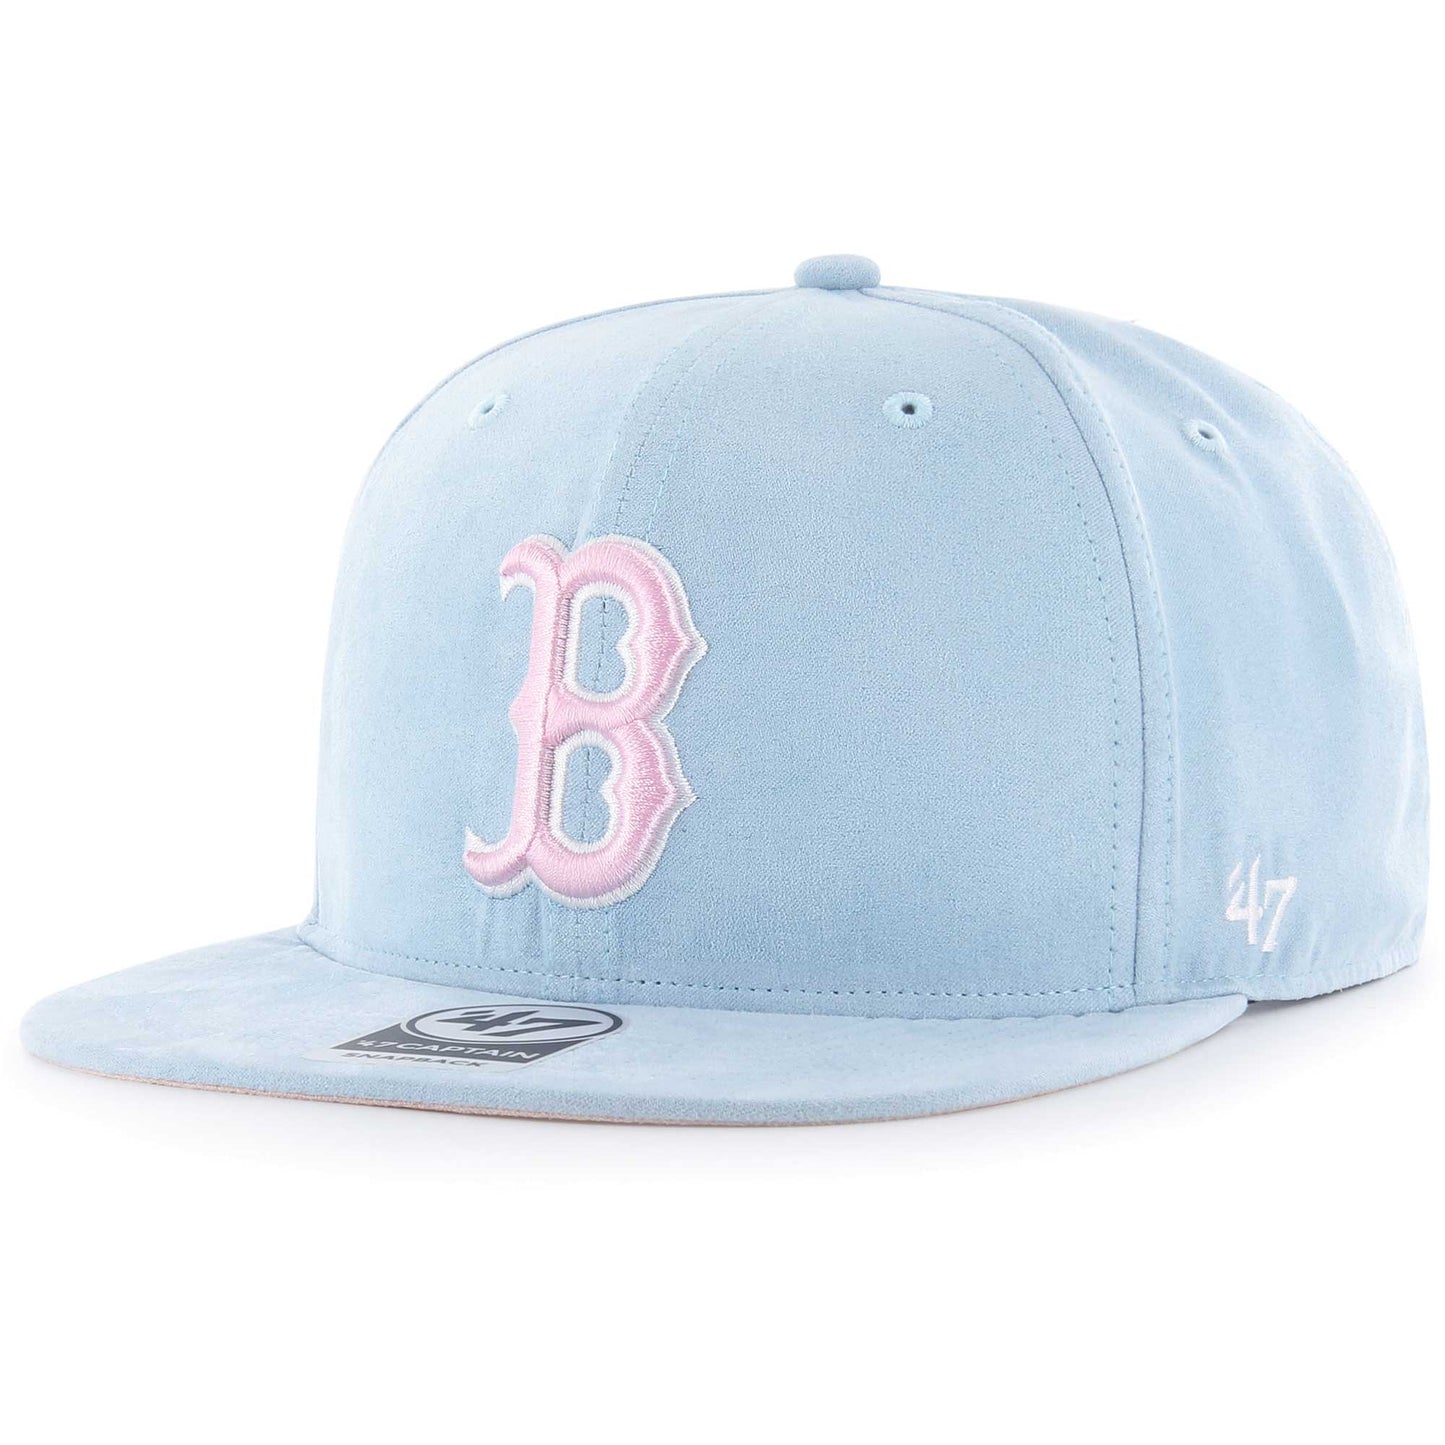 Boston Red Sox '47 Ultra Suede Captain Snapback Hat - Light Blue